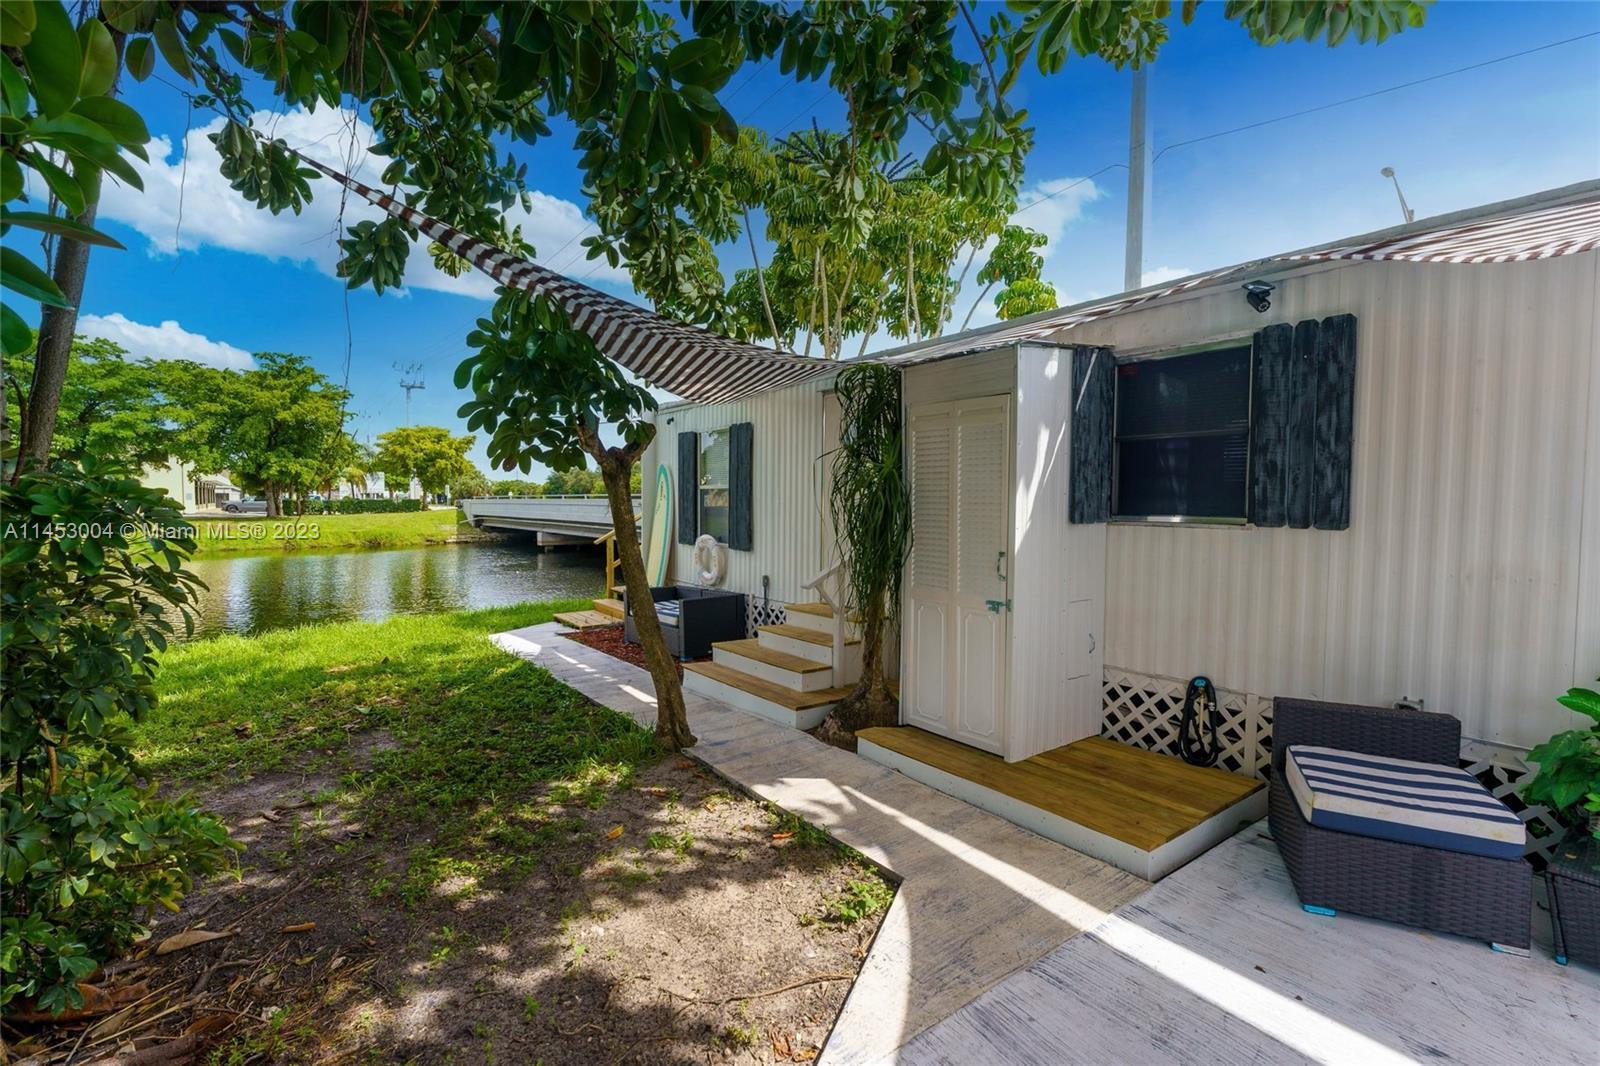 Photo of 6352 NE 11th Ave in Fort Lauderdale, FL